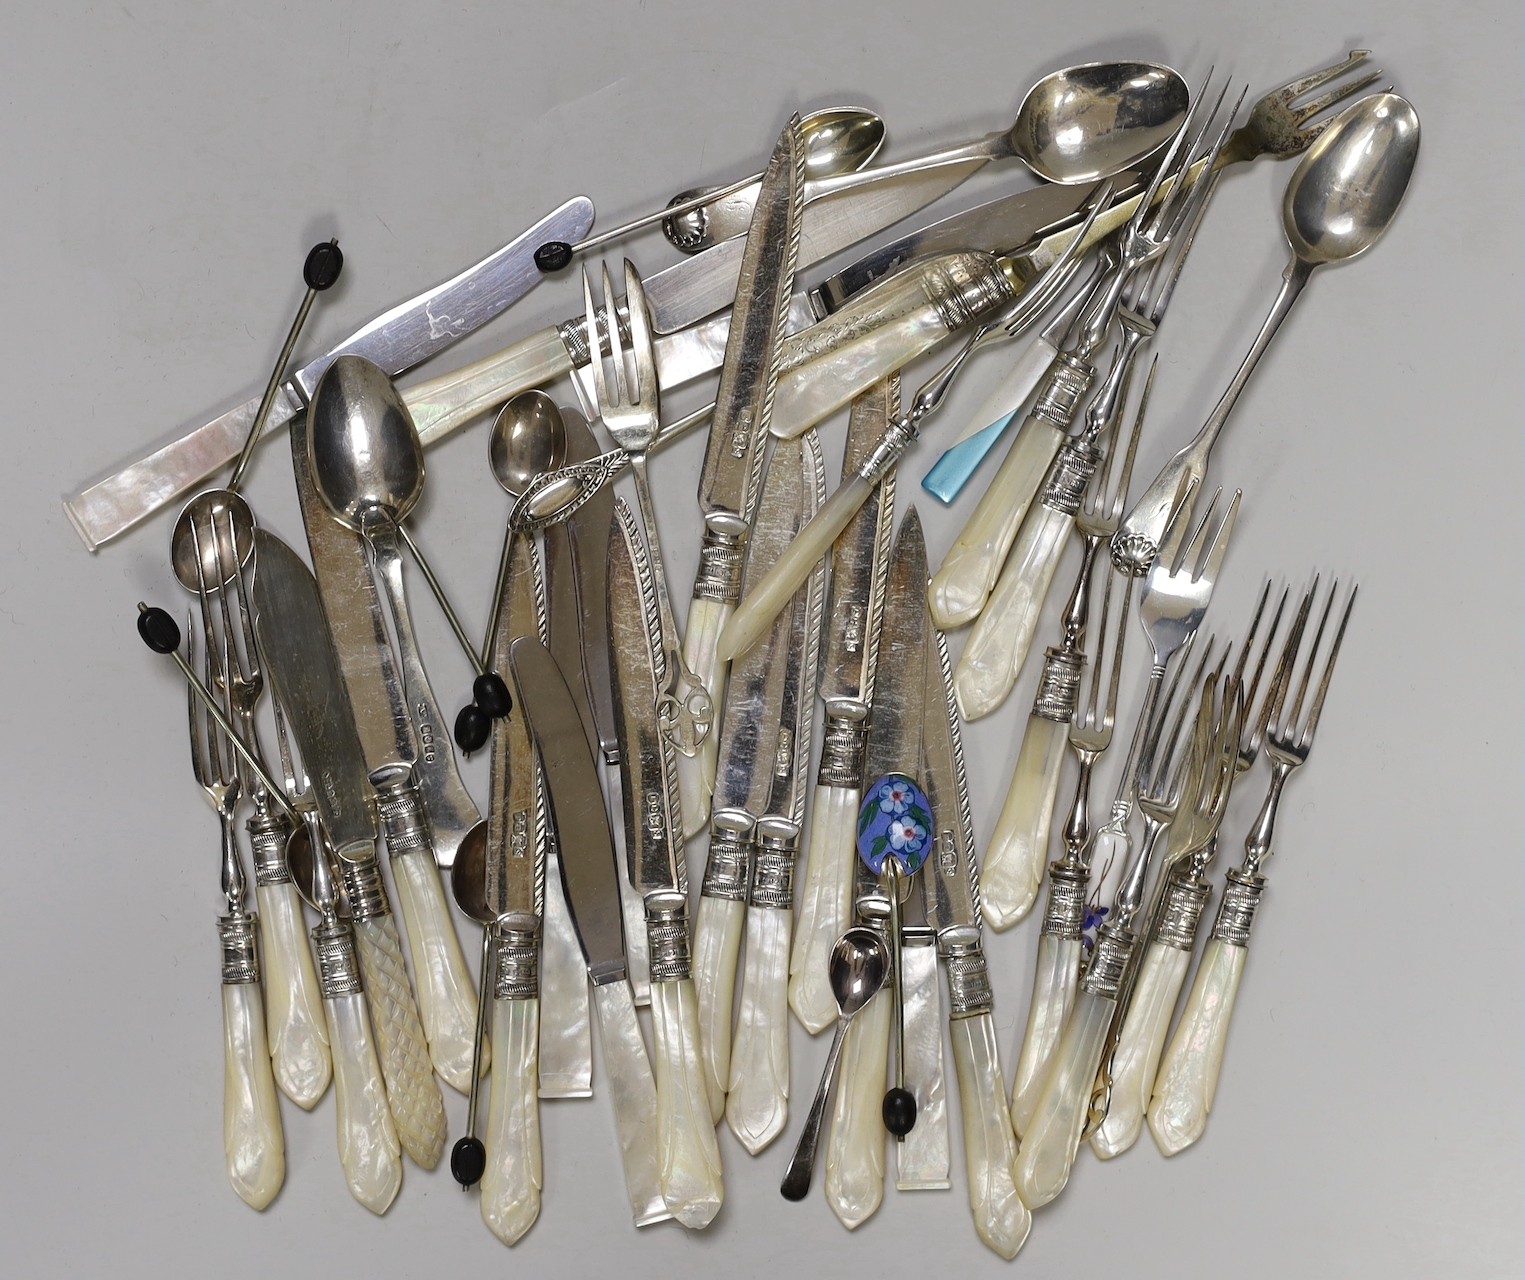 A selection of mounted mother-of-pearl knives and forks, together with finely decorated enamelled spoons